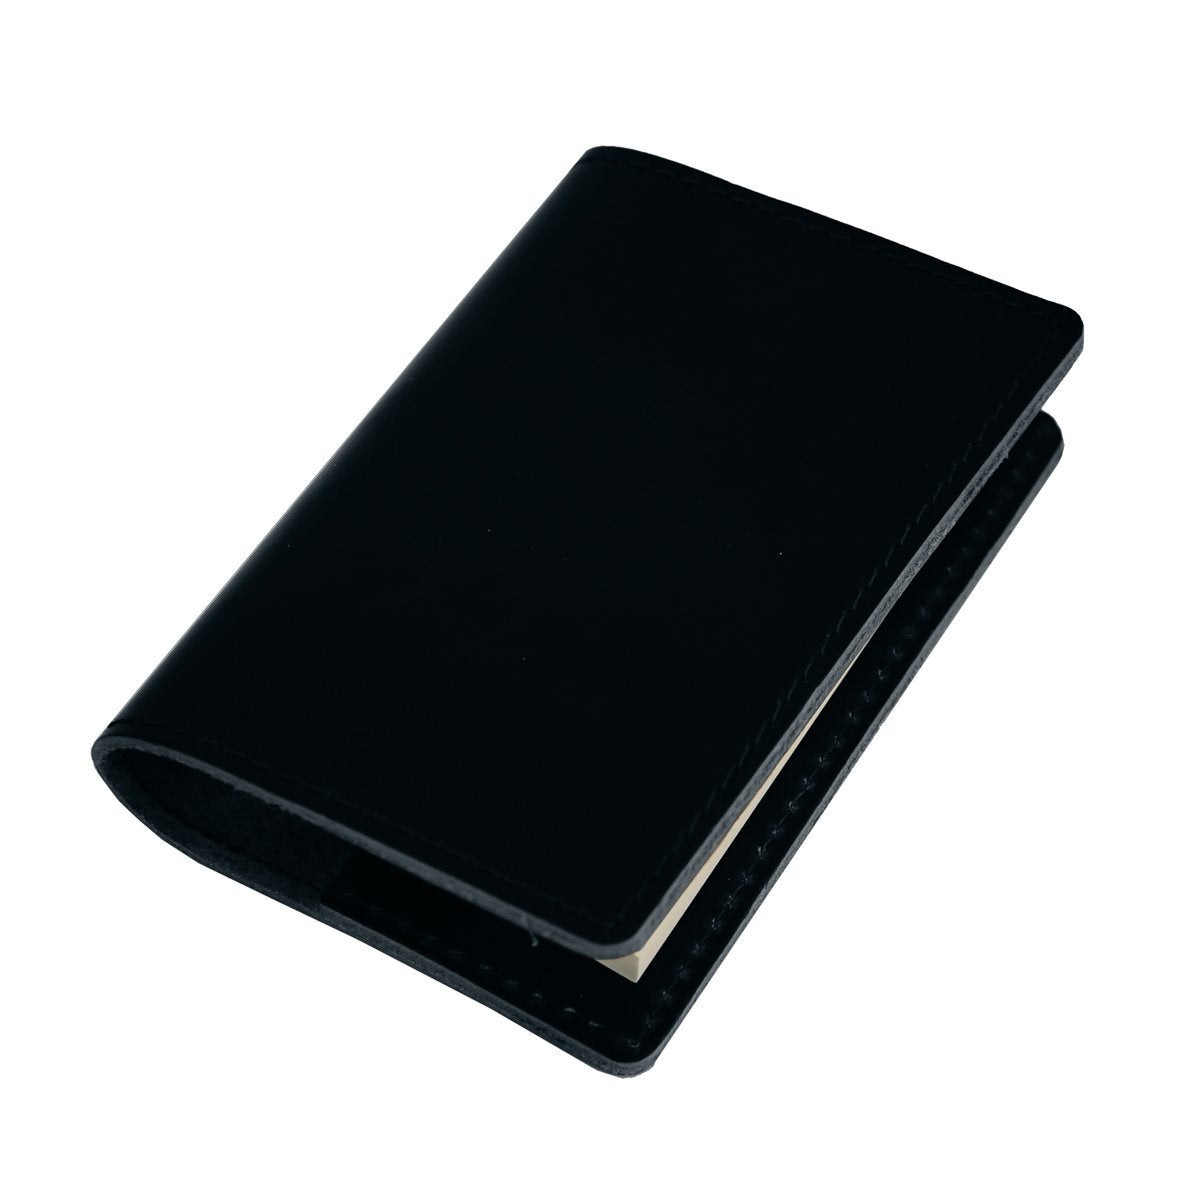 Refillable Pocket Leather Notebook